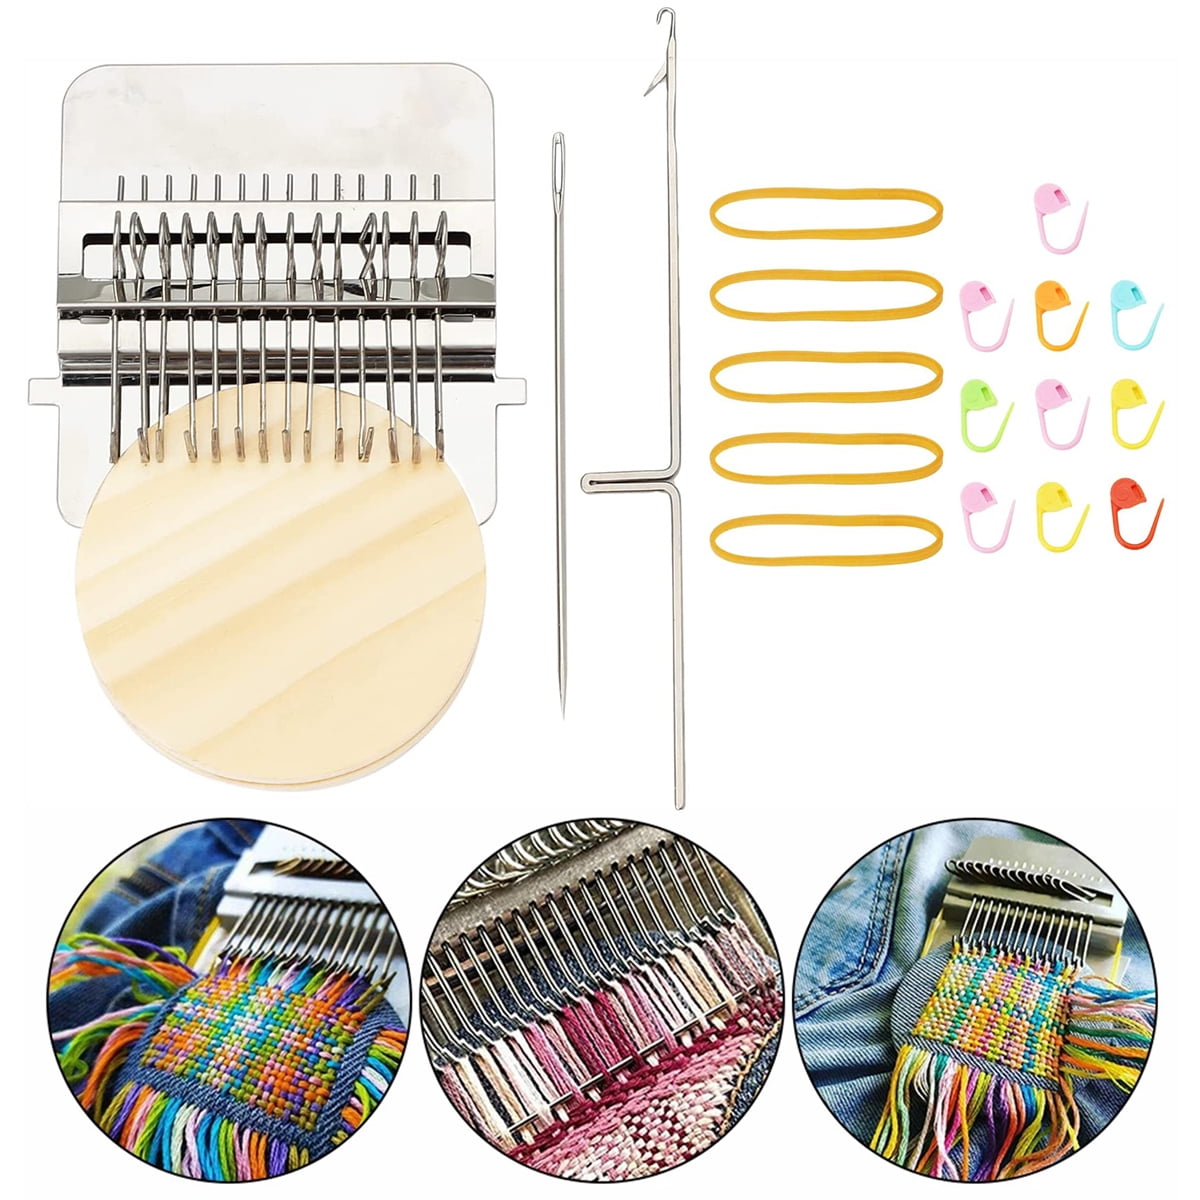 DEFNES Knitting Loom Kit, DIY Craft Knitting Board Looms with Loom Pick  Tool and Needle, Durable & Safe, Creativity for Kids Small Knitting Loom  Kit 